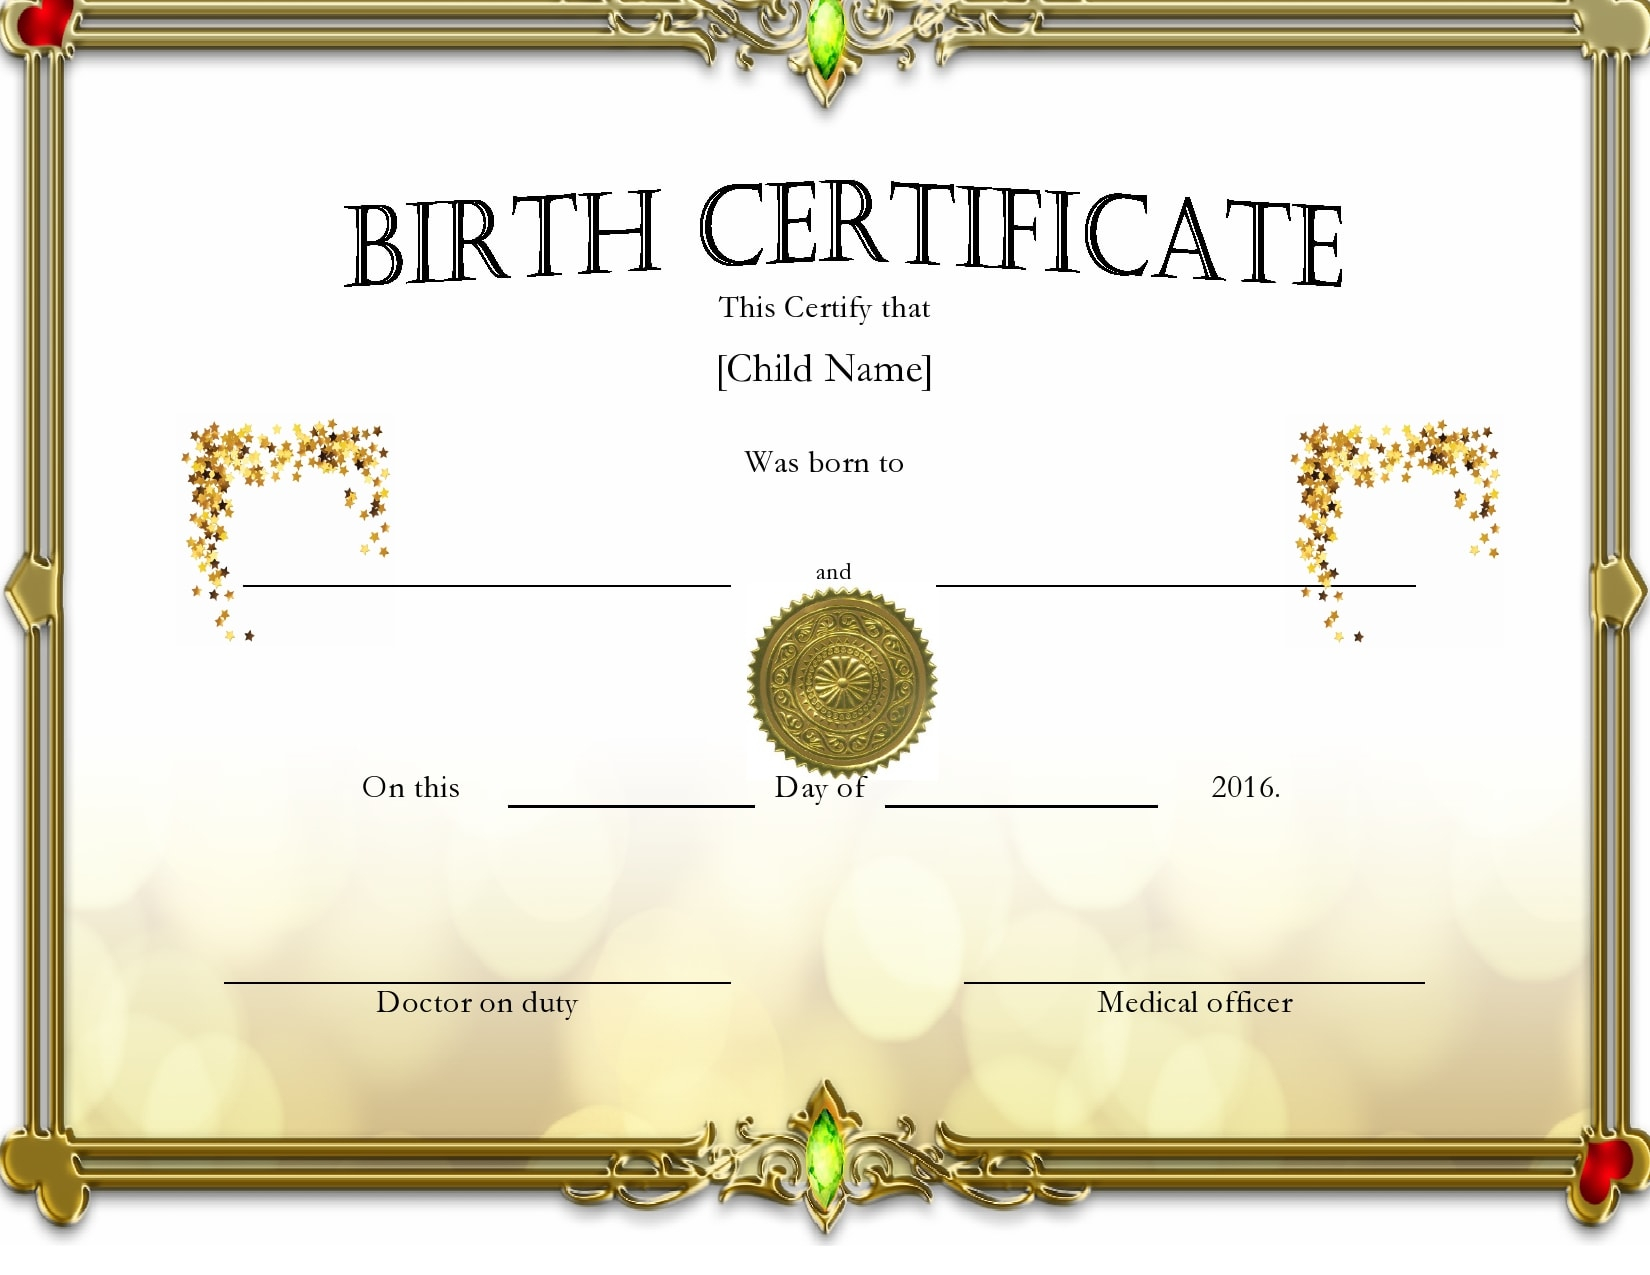 10 Blank Birth Certificate Templates (& Examples) – PrintableTemplates For Official Birth Certificate Template